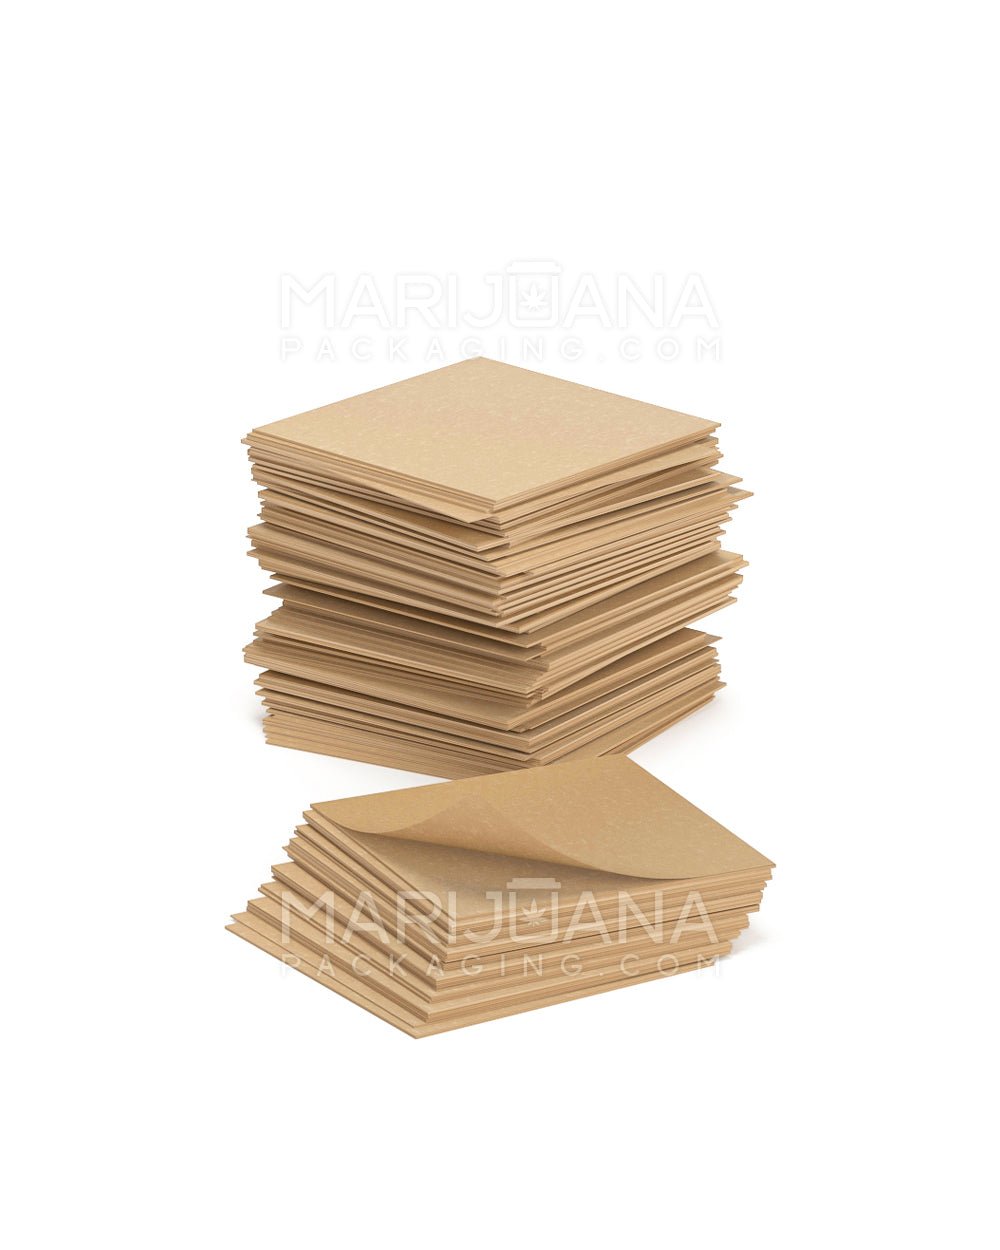 Non Silicone Coated Parchment Paper | 3in x 3in - Natural Brown - 1000 Count - 4